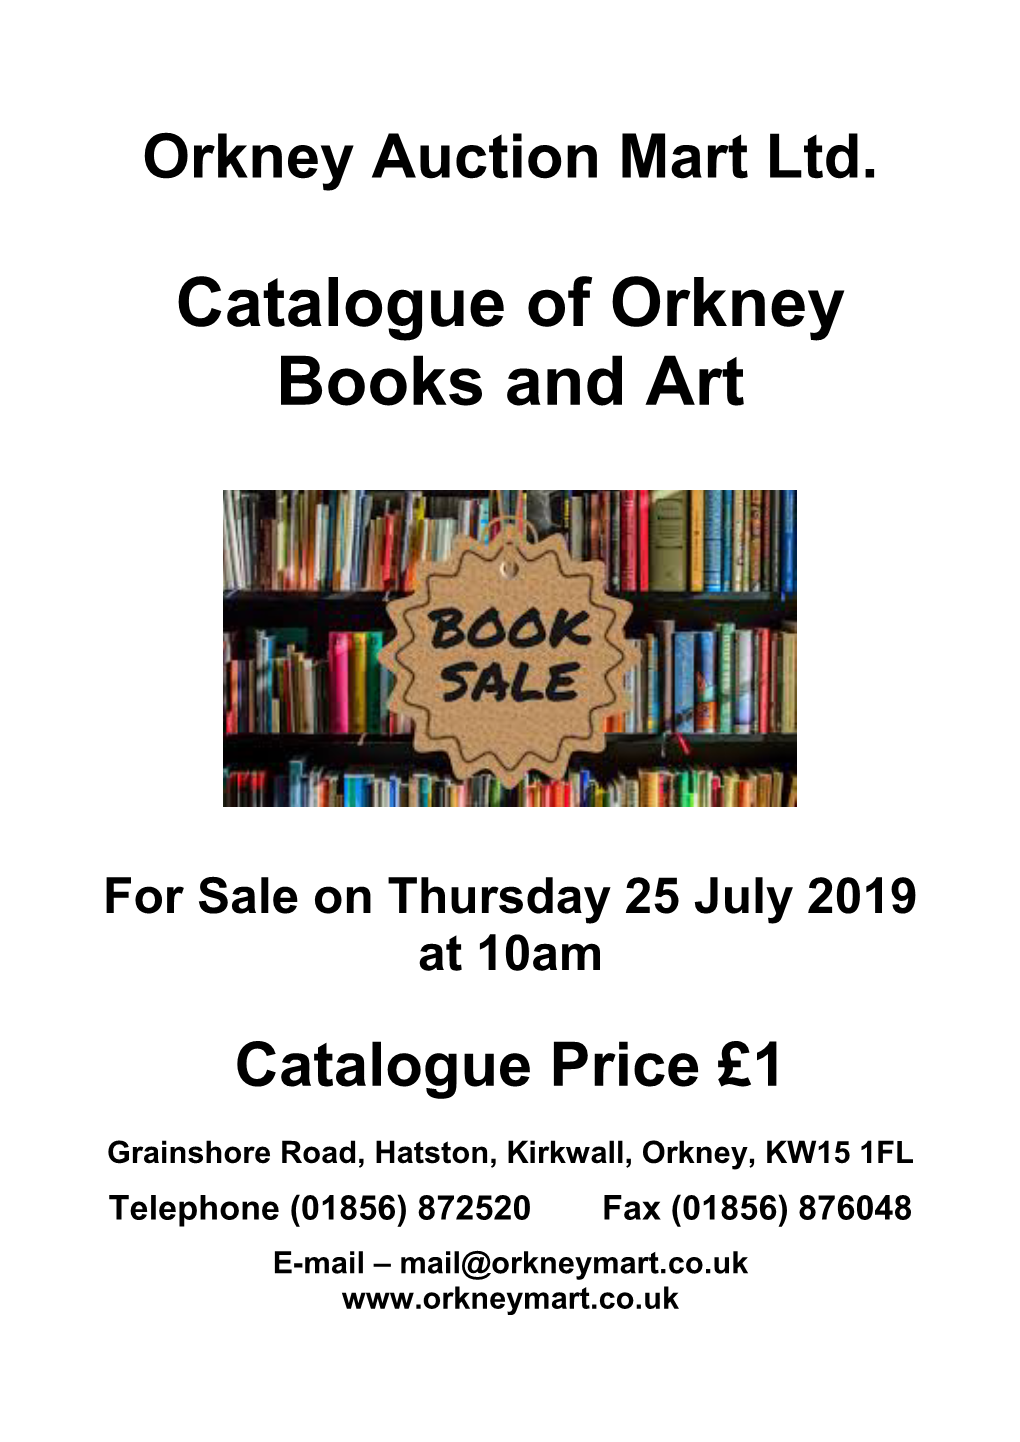 Catalogue of Orkney Books and Art